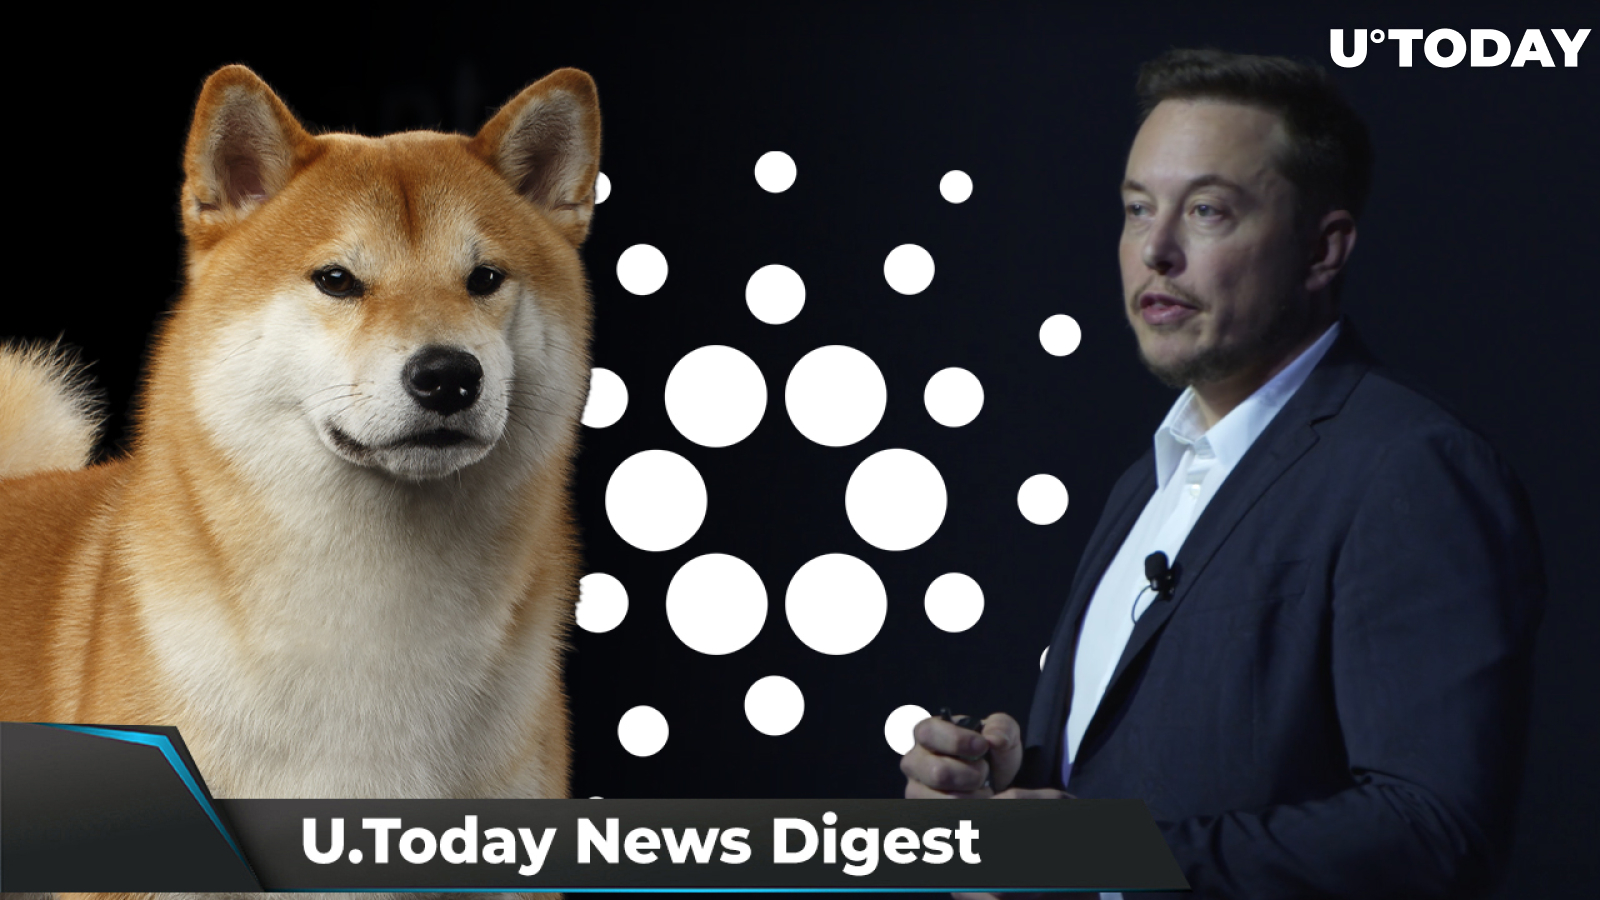 SHIB Net Flow Spikes 850%, Elon Musk Hints at Starlink Accepting DOGE, Cardano's SundaeSwap Sets New Milestone: Crypto News Digest by U.Today